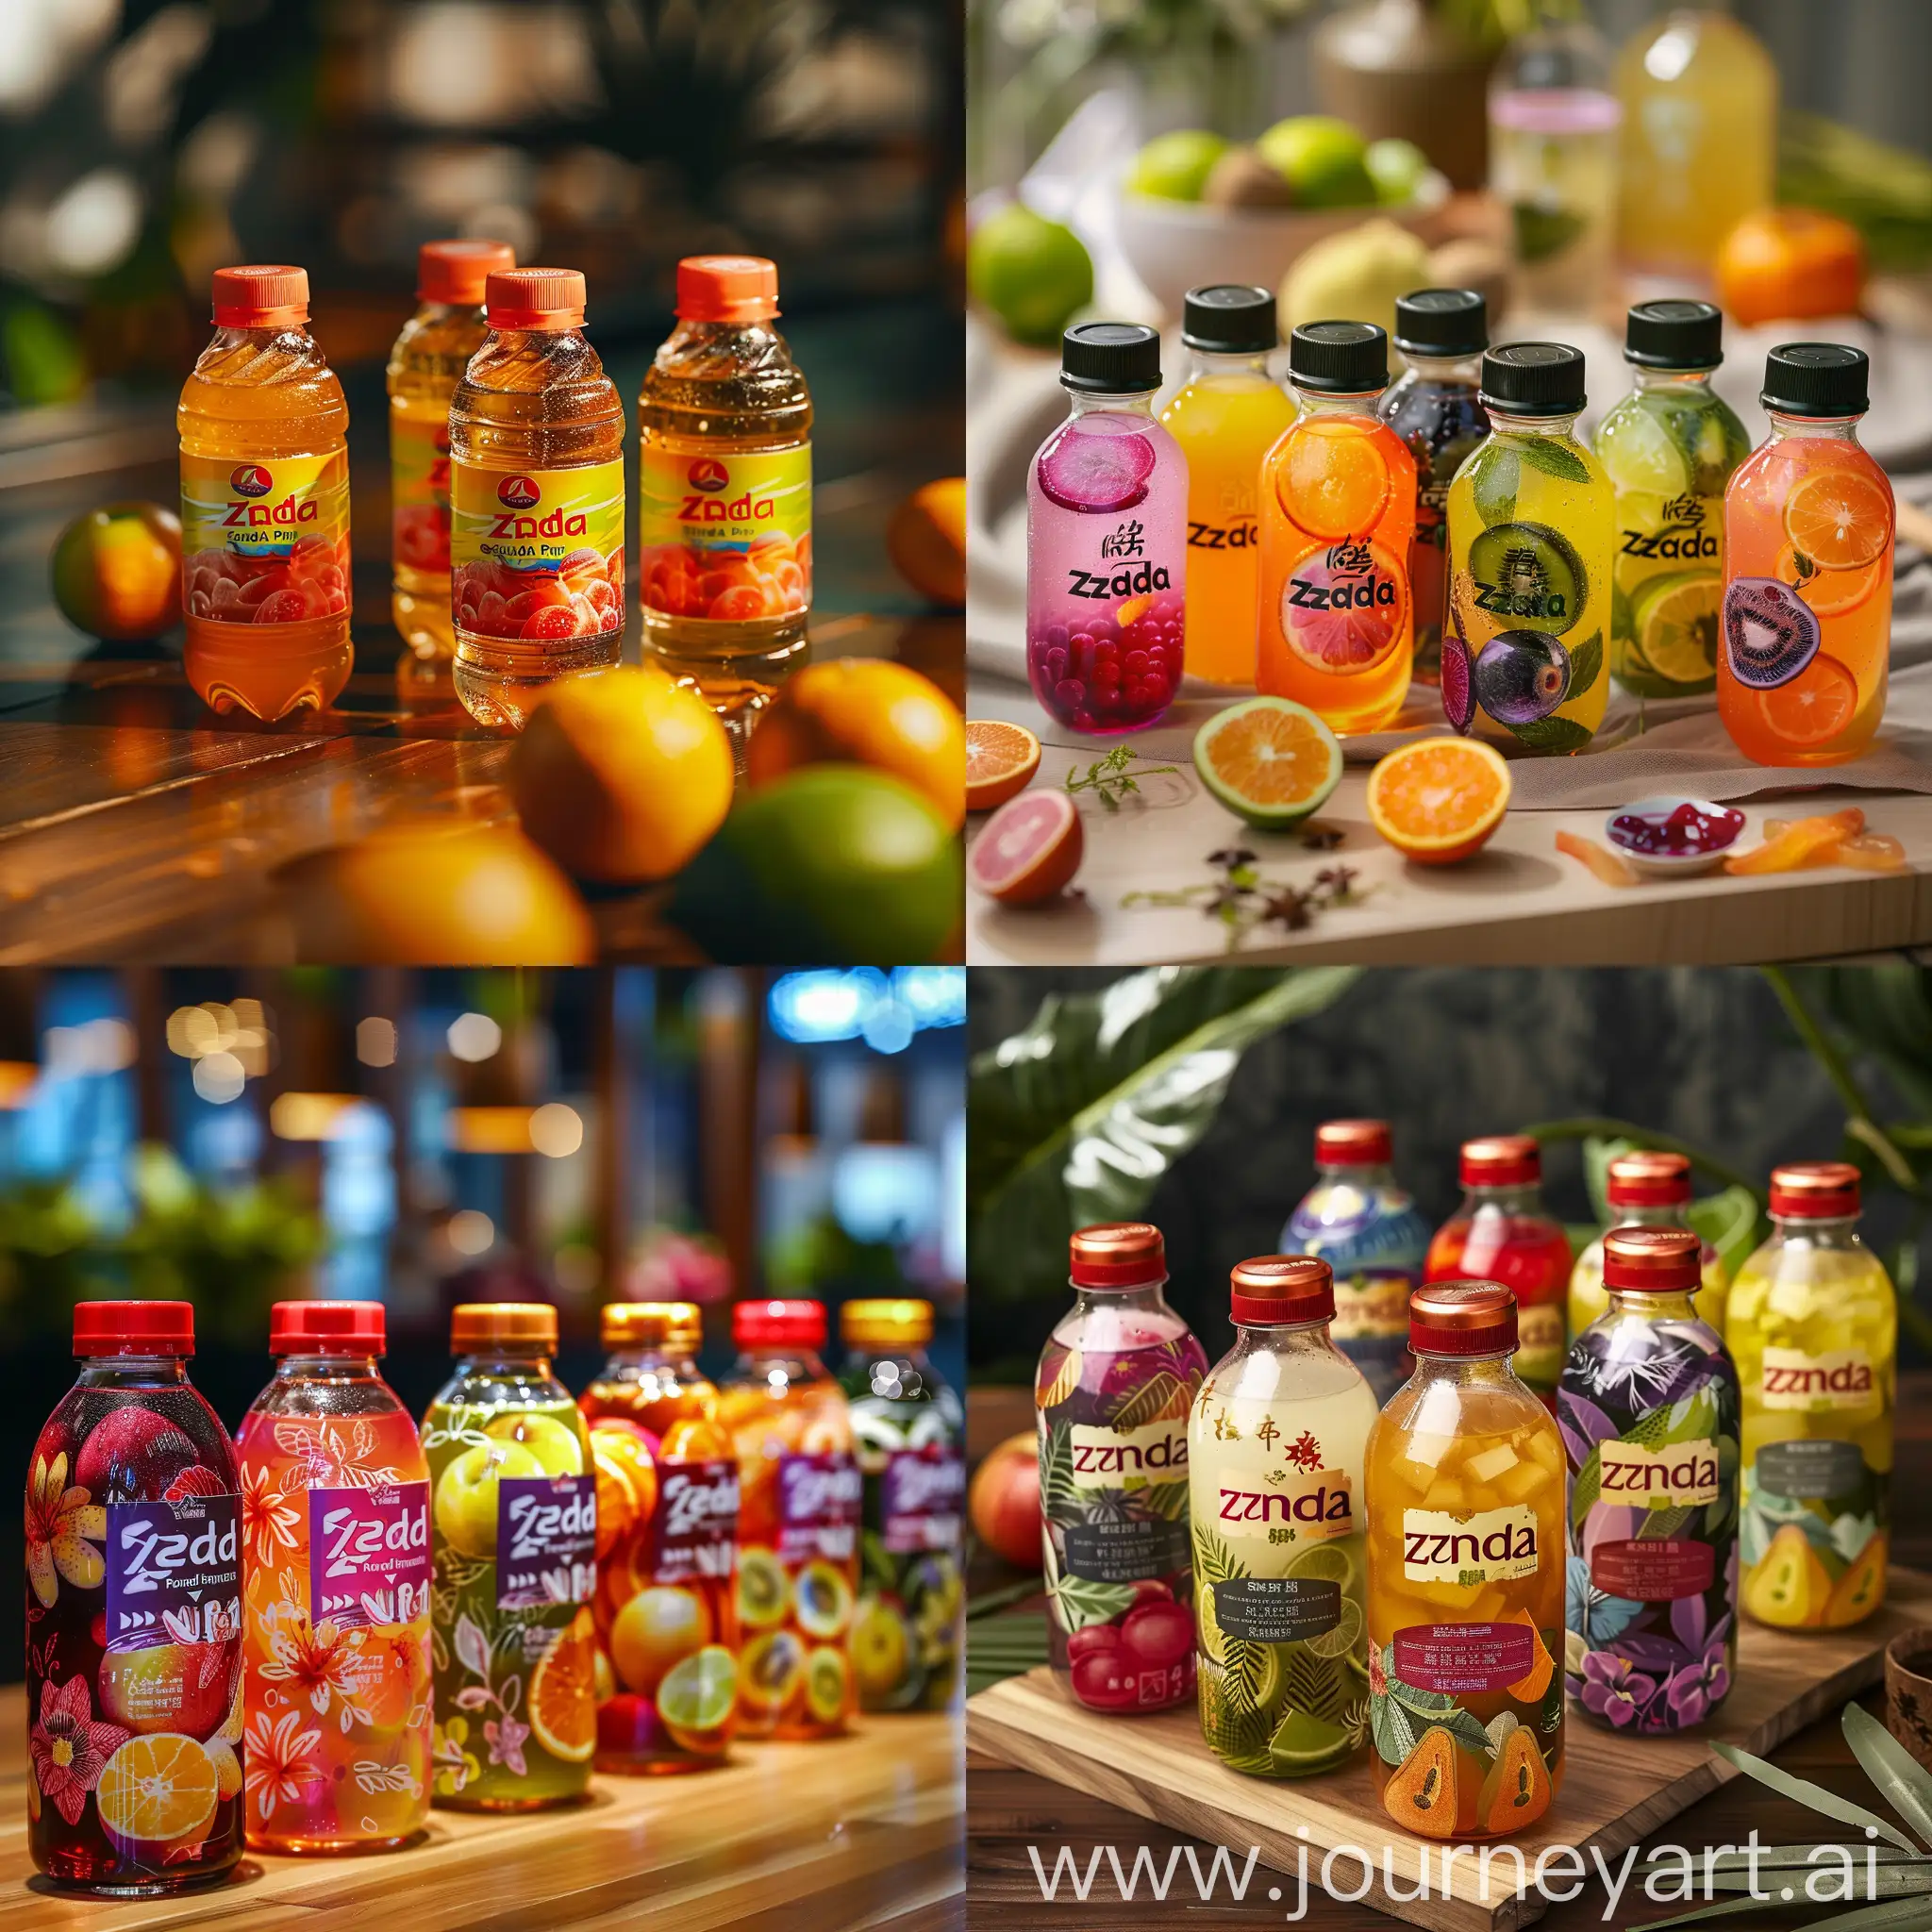 Exclusive-Zenda-Fruit-Drink-Sales-Point-at-Sports-Events-with-Limited-Edition-Cobranded-Products